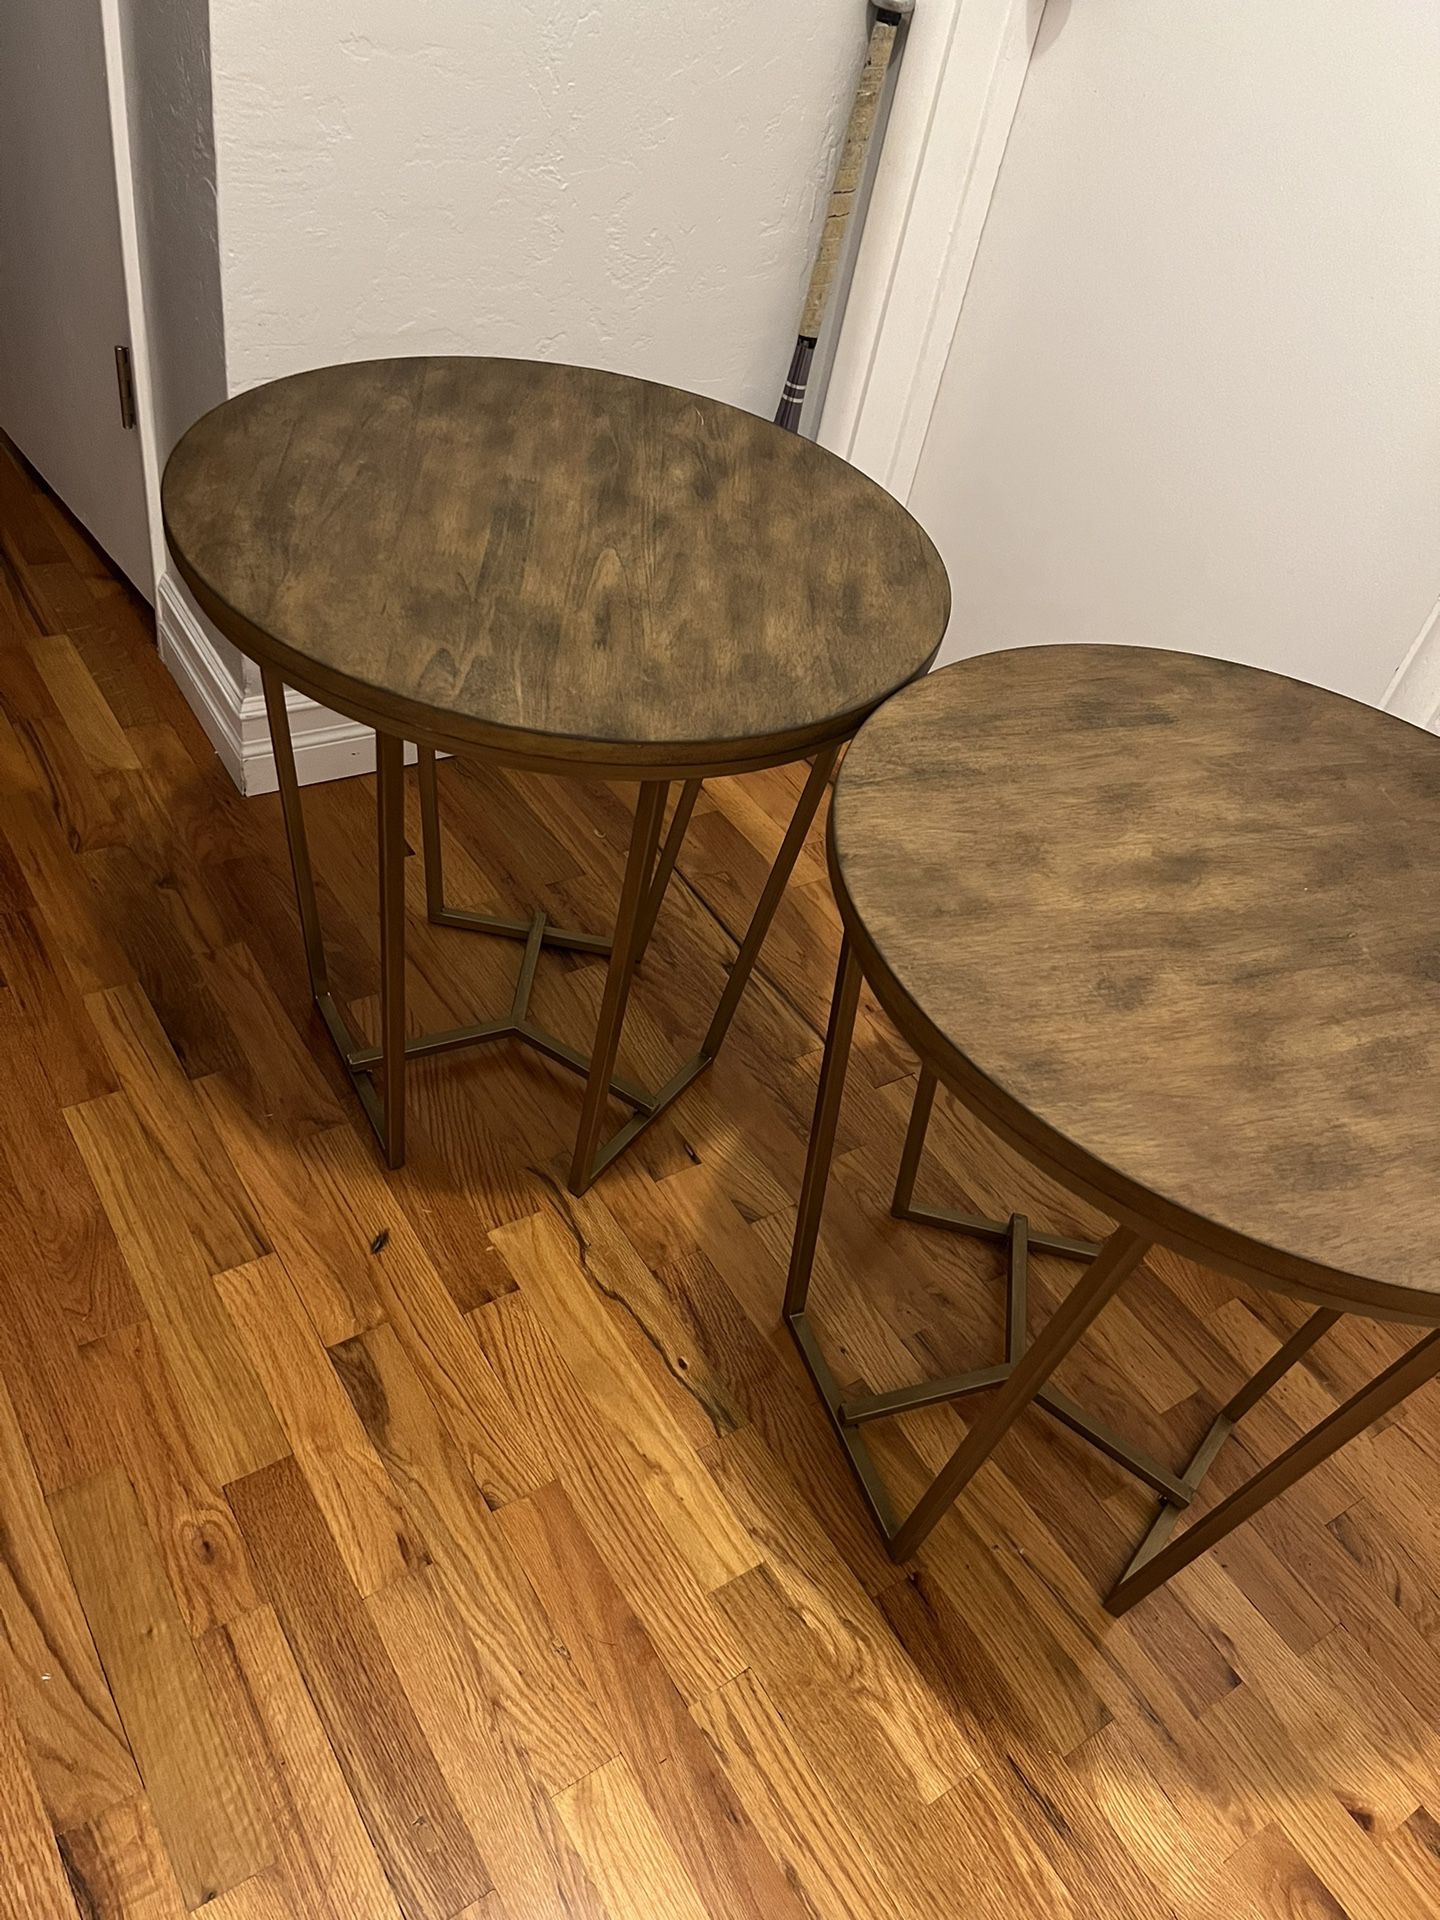 2 End Tables / Lamp Tables